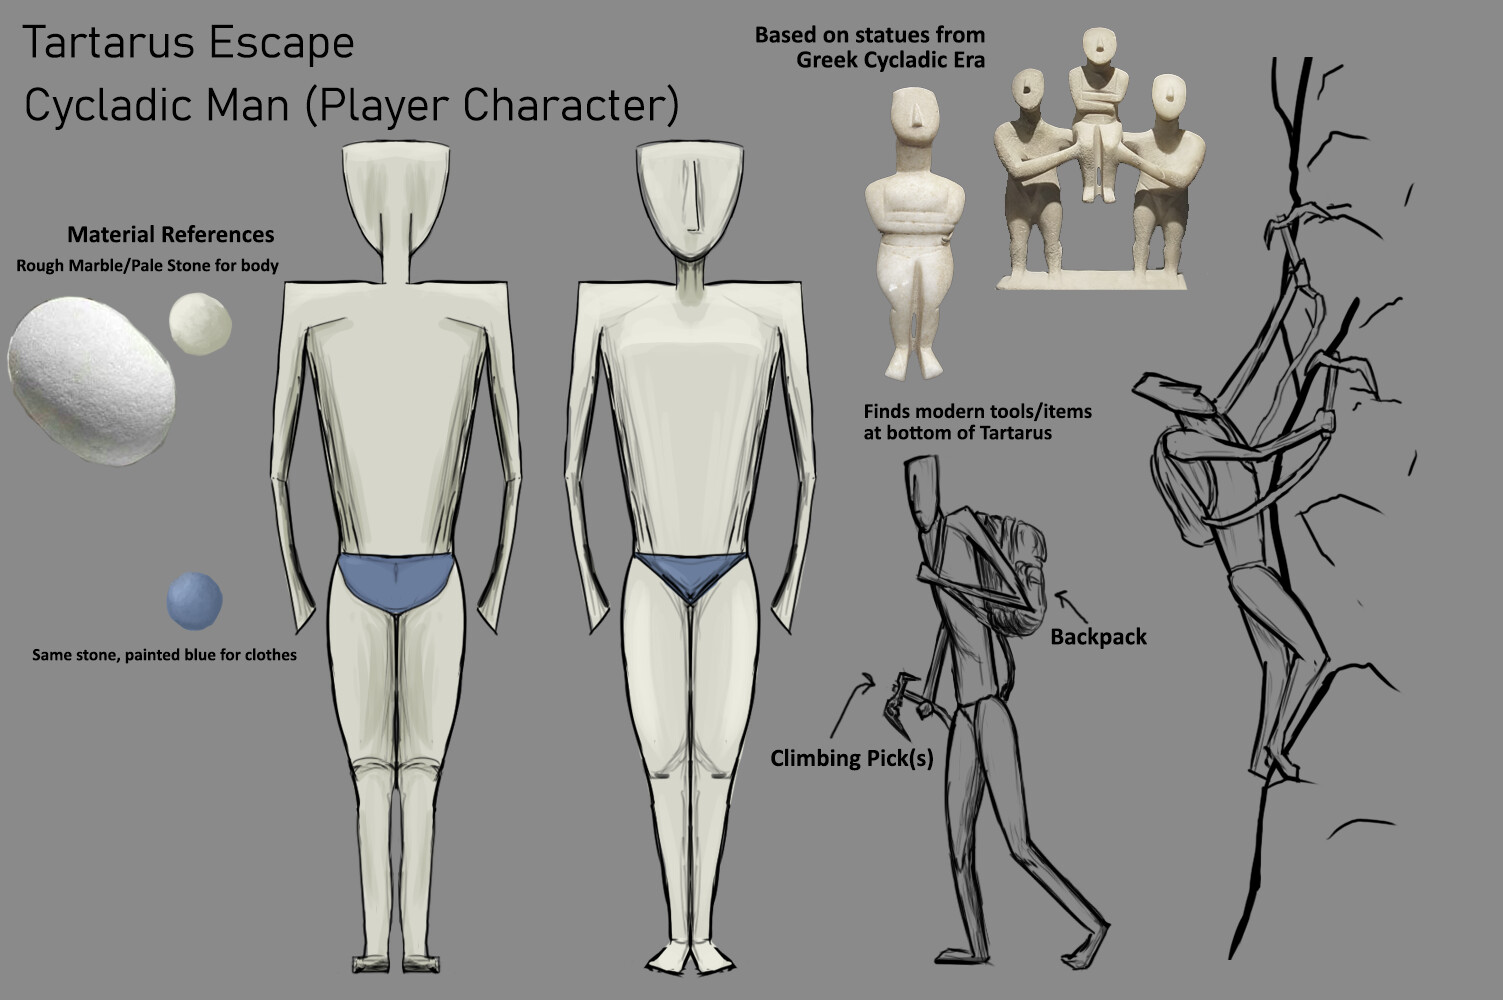 Cycladic Man Design Sheet, featuring sketches and design + material references